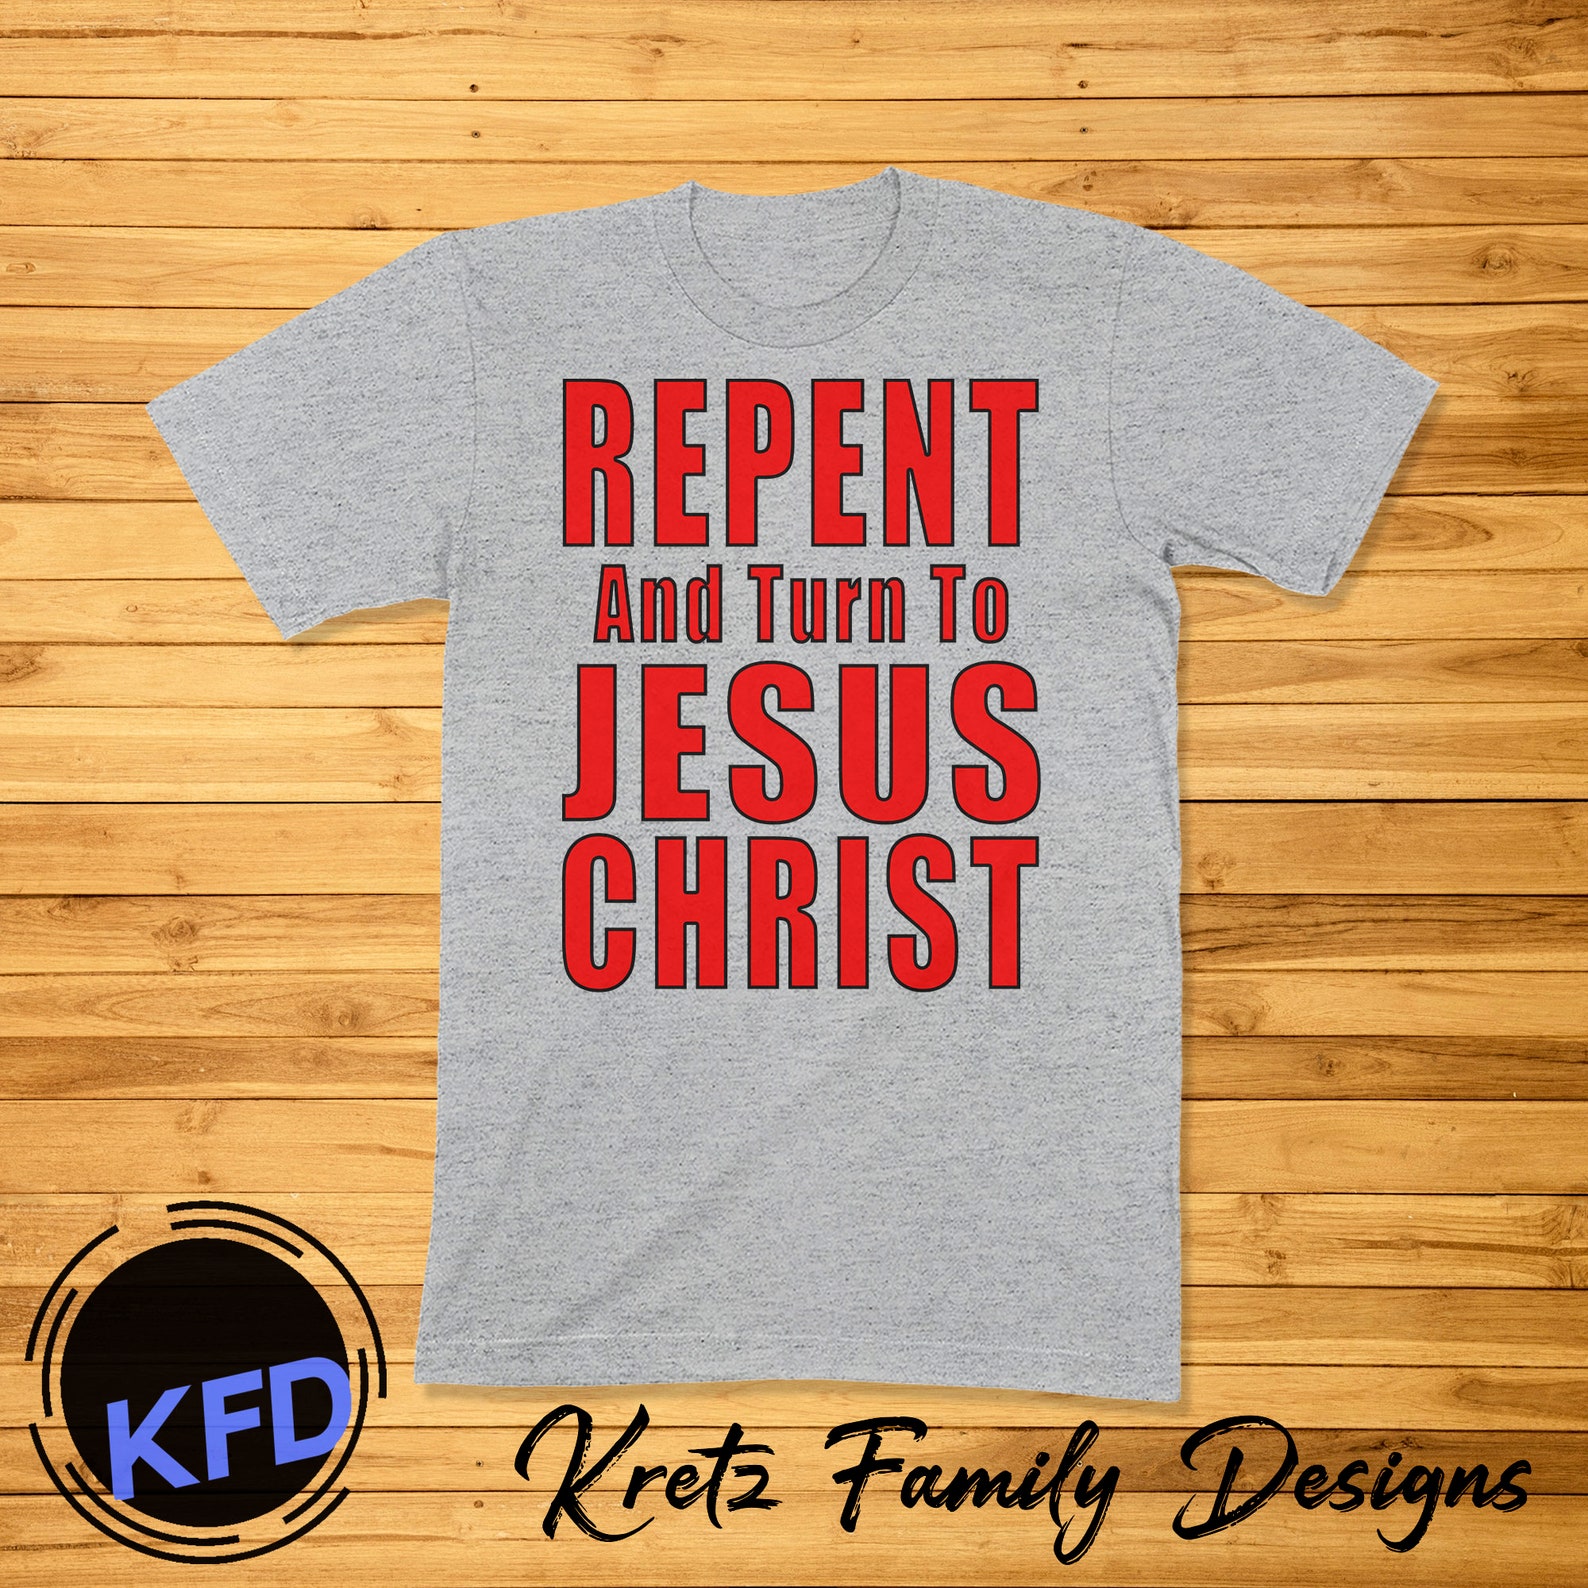 Repent and Believe in Jesus Christ Repentance Acts 2:38 T-shirt ...